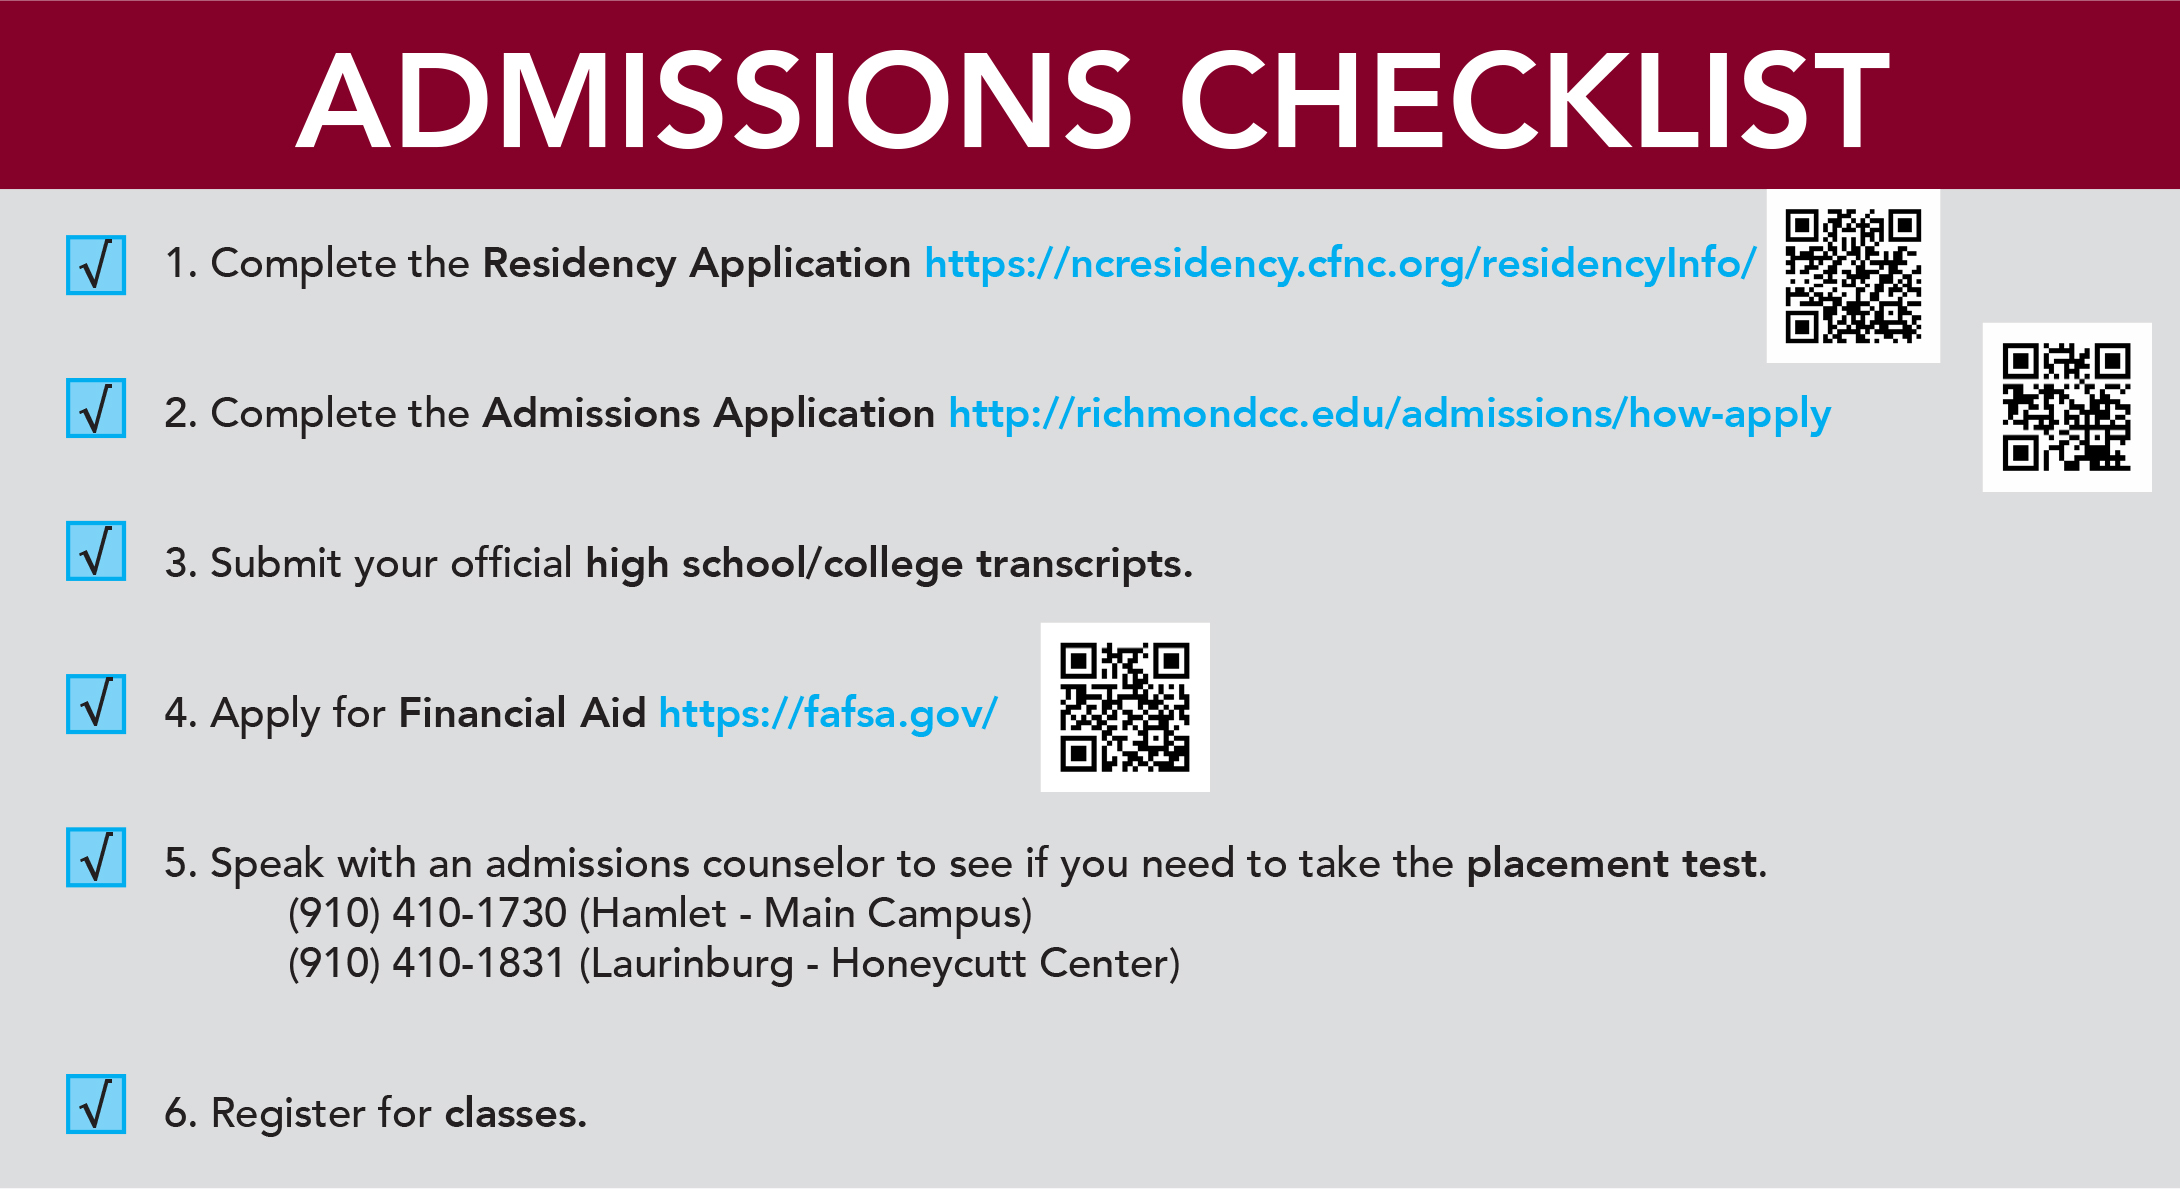 Checklist for the registration day on July 18